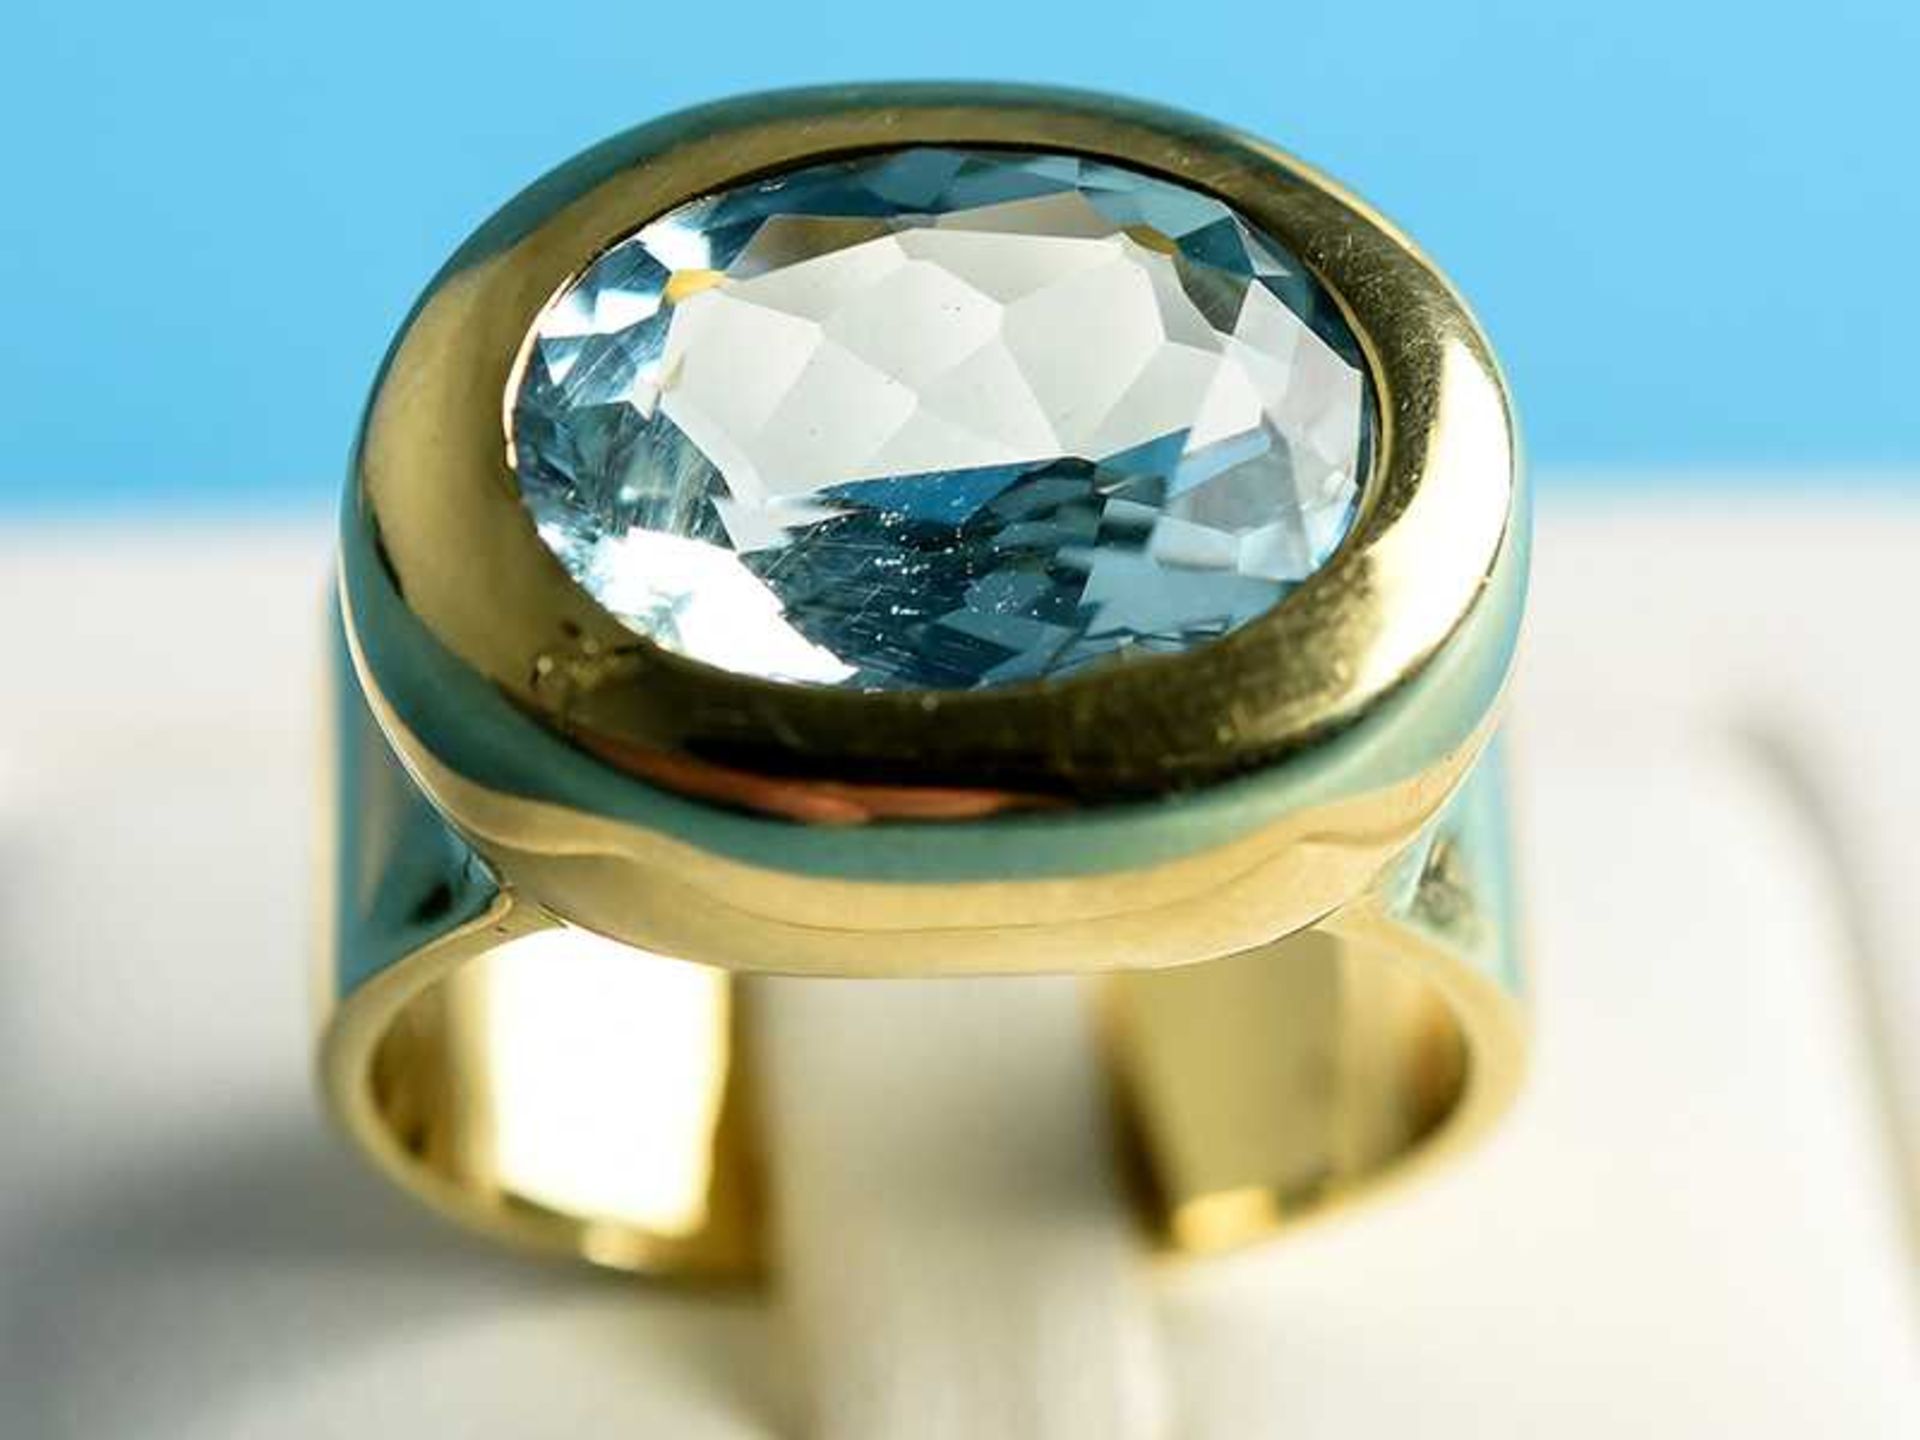 Massiver Bandring mit Aquamarin ca. 5,8 ct, Goldschmiedearbeit, 20. Jh. 585/- Gelbgold. - Image 9 of 10